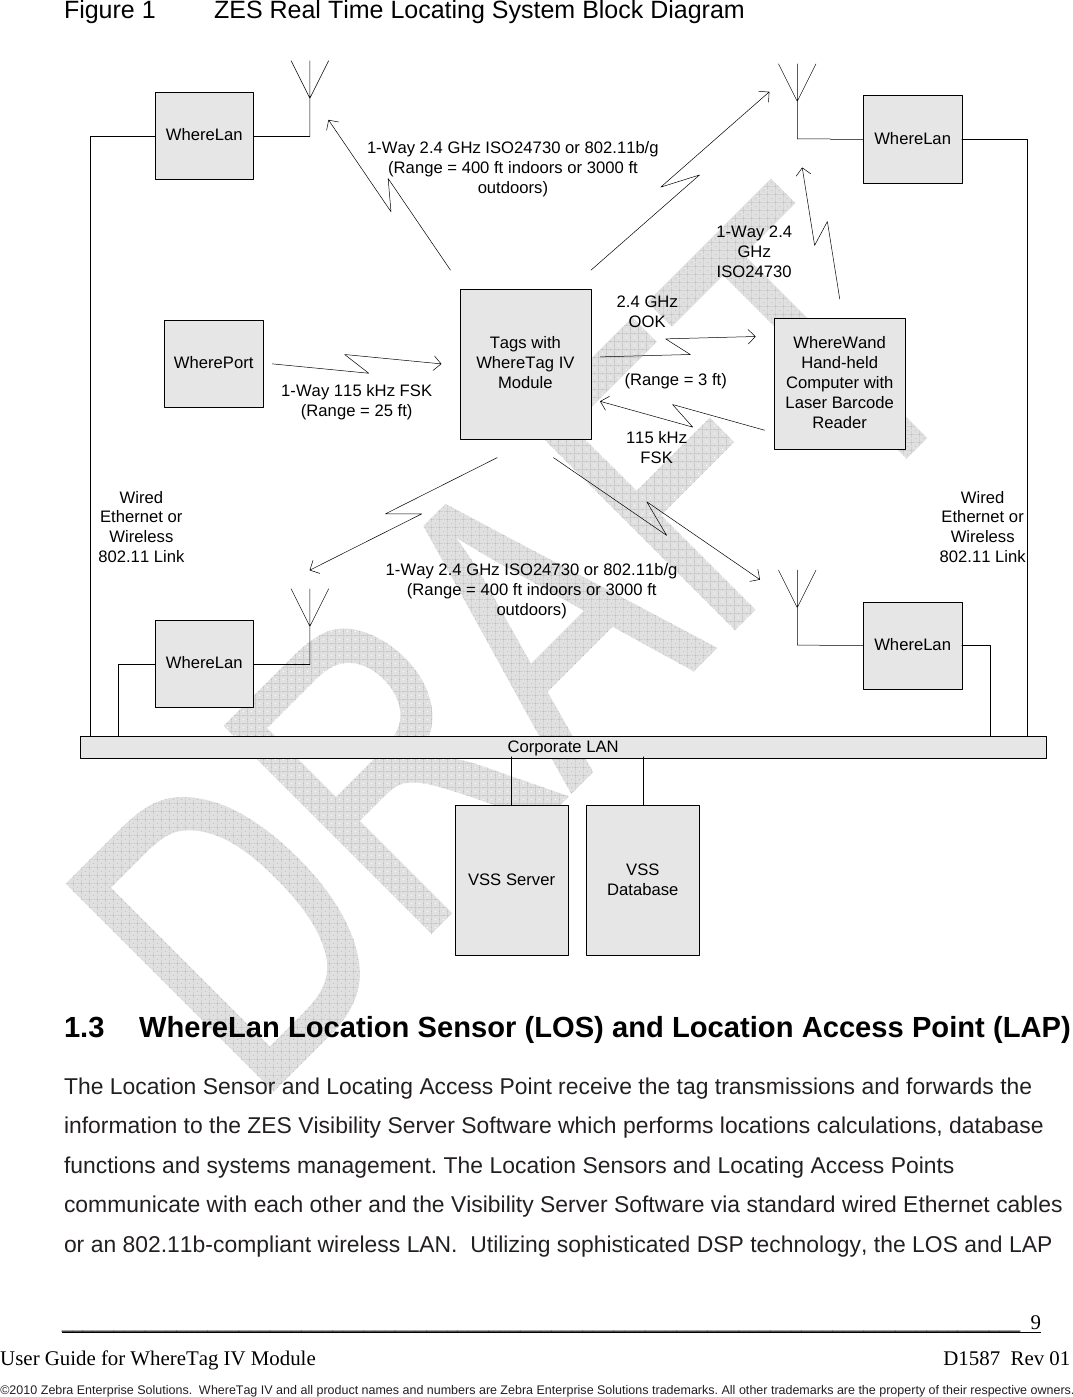   ____________________________________________________________________________________________  9 User Guide for WhereTag IV Module                                      D1587  Rev 01©2010 Zebra Enterprise Solutions.  WhereTag IV and all product names and numbers are Zebra Enterprise Solutions trademarks. All other trademarks are the property of their respective owners. Figure 1   ZES Real Time Locating System Block Diagram Tags with WhereTag IV ModuleVSS Server VSS Database1-Way 2.4 GHz ISO24730 or 802.11b/g(Range = 400 ft indoors or 3000 ft outdoors) WherePort 1-Way 115 kHz FSK(Range = 25 ft) WhereWandHand-held Computer with Laser Barcode Reader115 kHz FSK2.4 GHz OOK(Range = 3 ft)1-Way 2.4 GHz ISO24730WhereLan WhereLanWhereLanWhereLanCorporate LANWired Ethernet or Wireless 802.11 LinkWired Ethernet or Wireless 802.11 Link1-Way 2.4 GHz ISO24730 or 802.11b/g(Range = 400 ft indoors or 3000 ft outdoors)  1.3  WhereLan Location Sensor (LOS) and Location Access Point (LAP) The Location Sensor and Locating Access Point receive the tag transmissions and forwards the information to the ZES Visibility Server Software which performs locations calculations, database functions and systems management. The Location Sensors and Locating Access Points communicate with each other and the Visibility Server Software via standard wired Ethernet cables or an 802.11b-compliant wireless LAN.  Utilizing sophisticated DSP technology, the LOS and LAP 